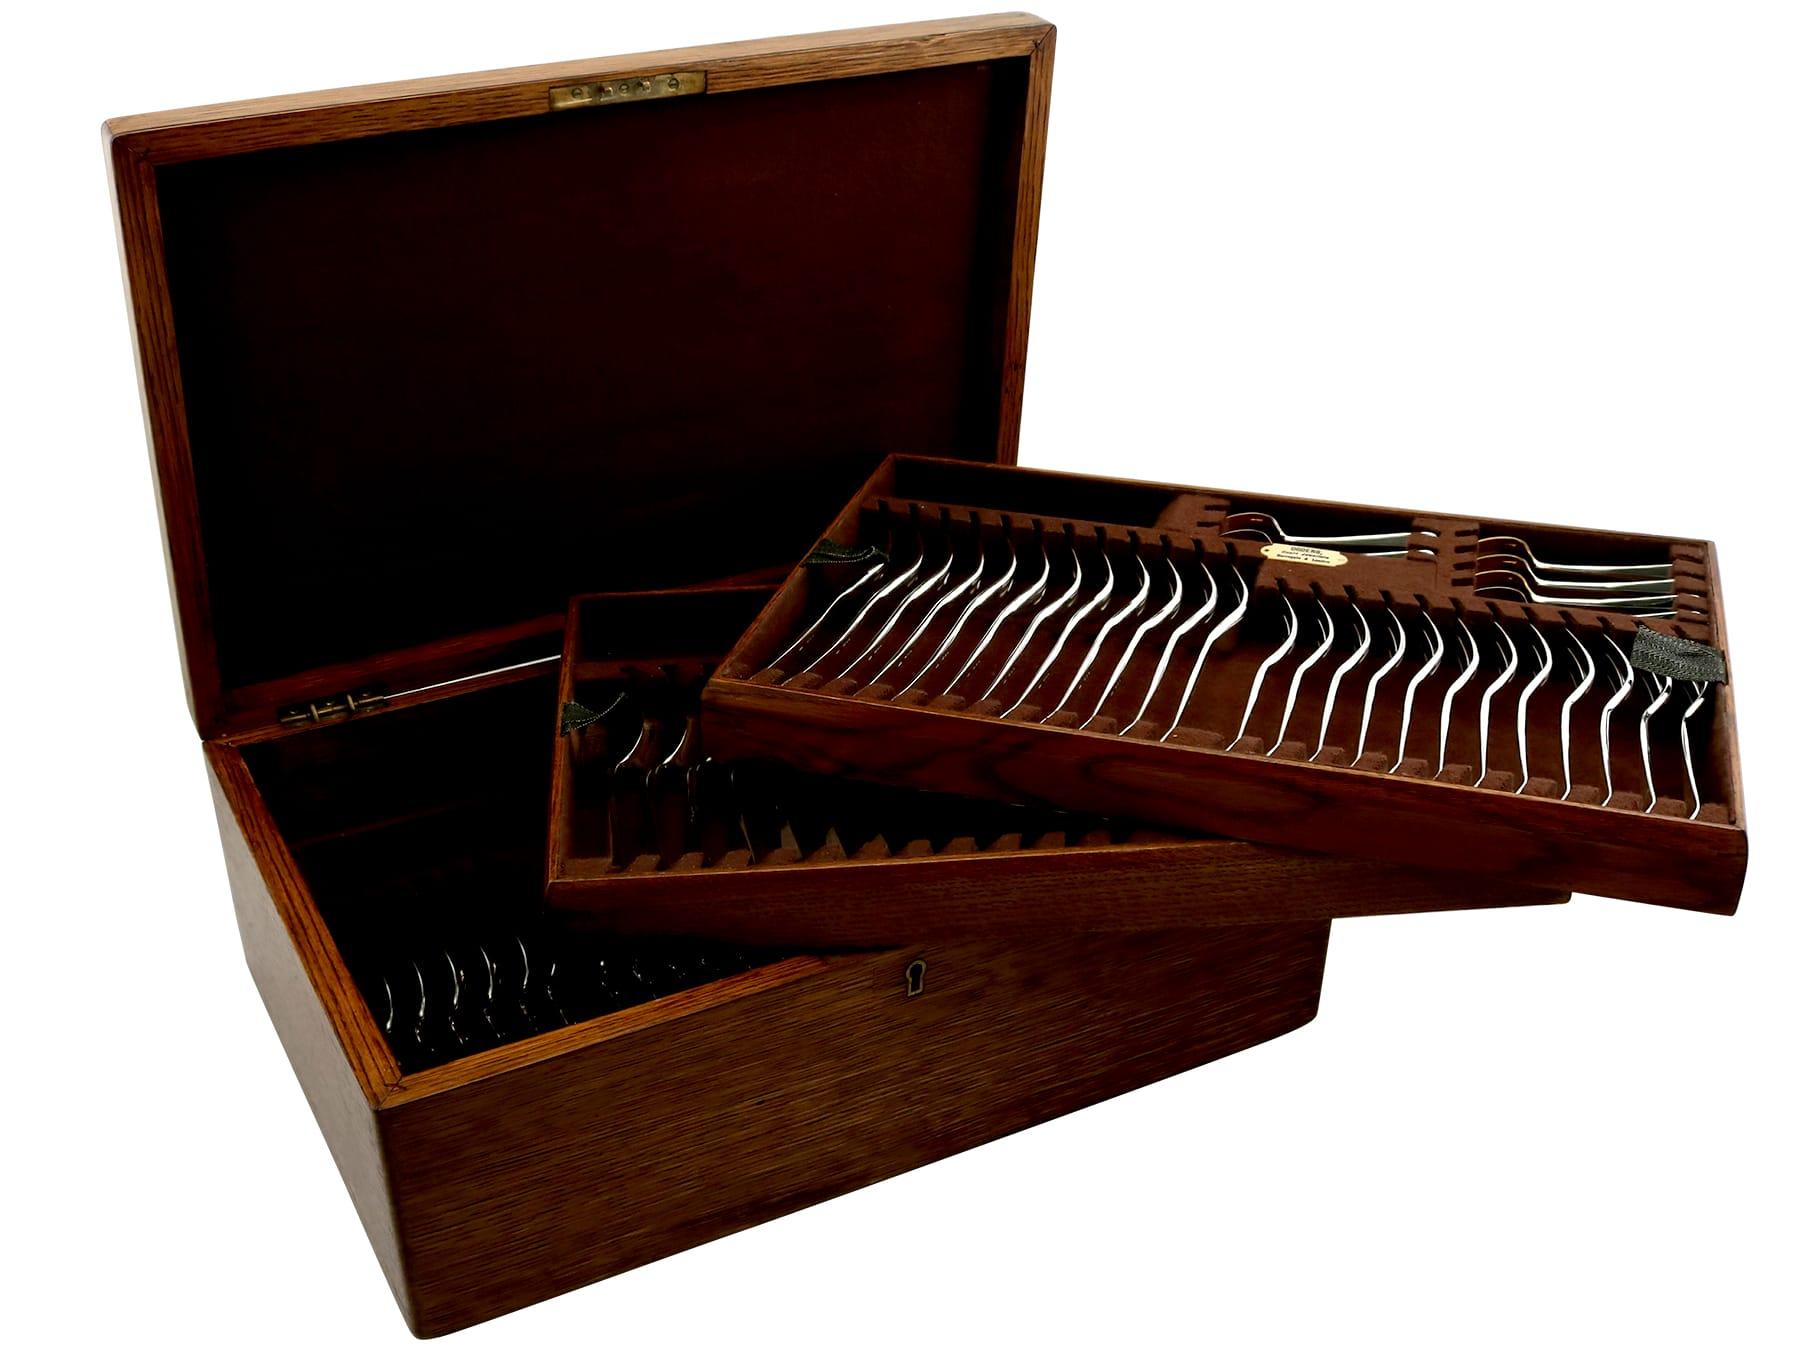 An exceptional, fine and impressive vintage George VI English straight sterling silver Hanoverian rat tail pattern 86 piece canteen of cutlery for twelve persons - boxed; an addition to our vintage flatware collection

The pieces of this exceptional